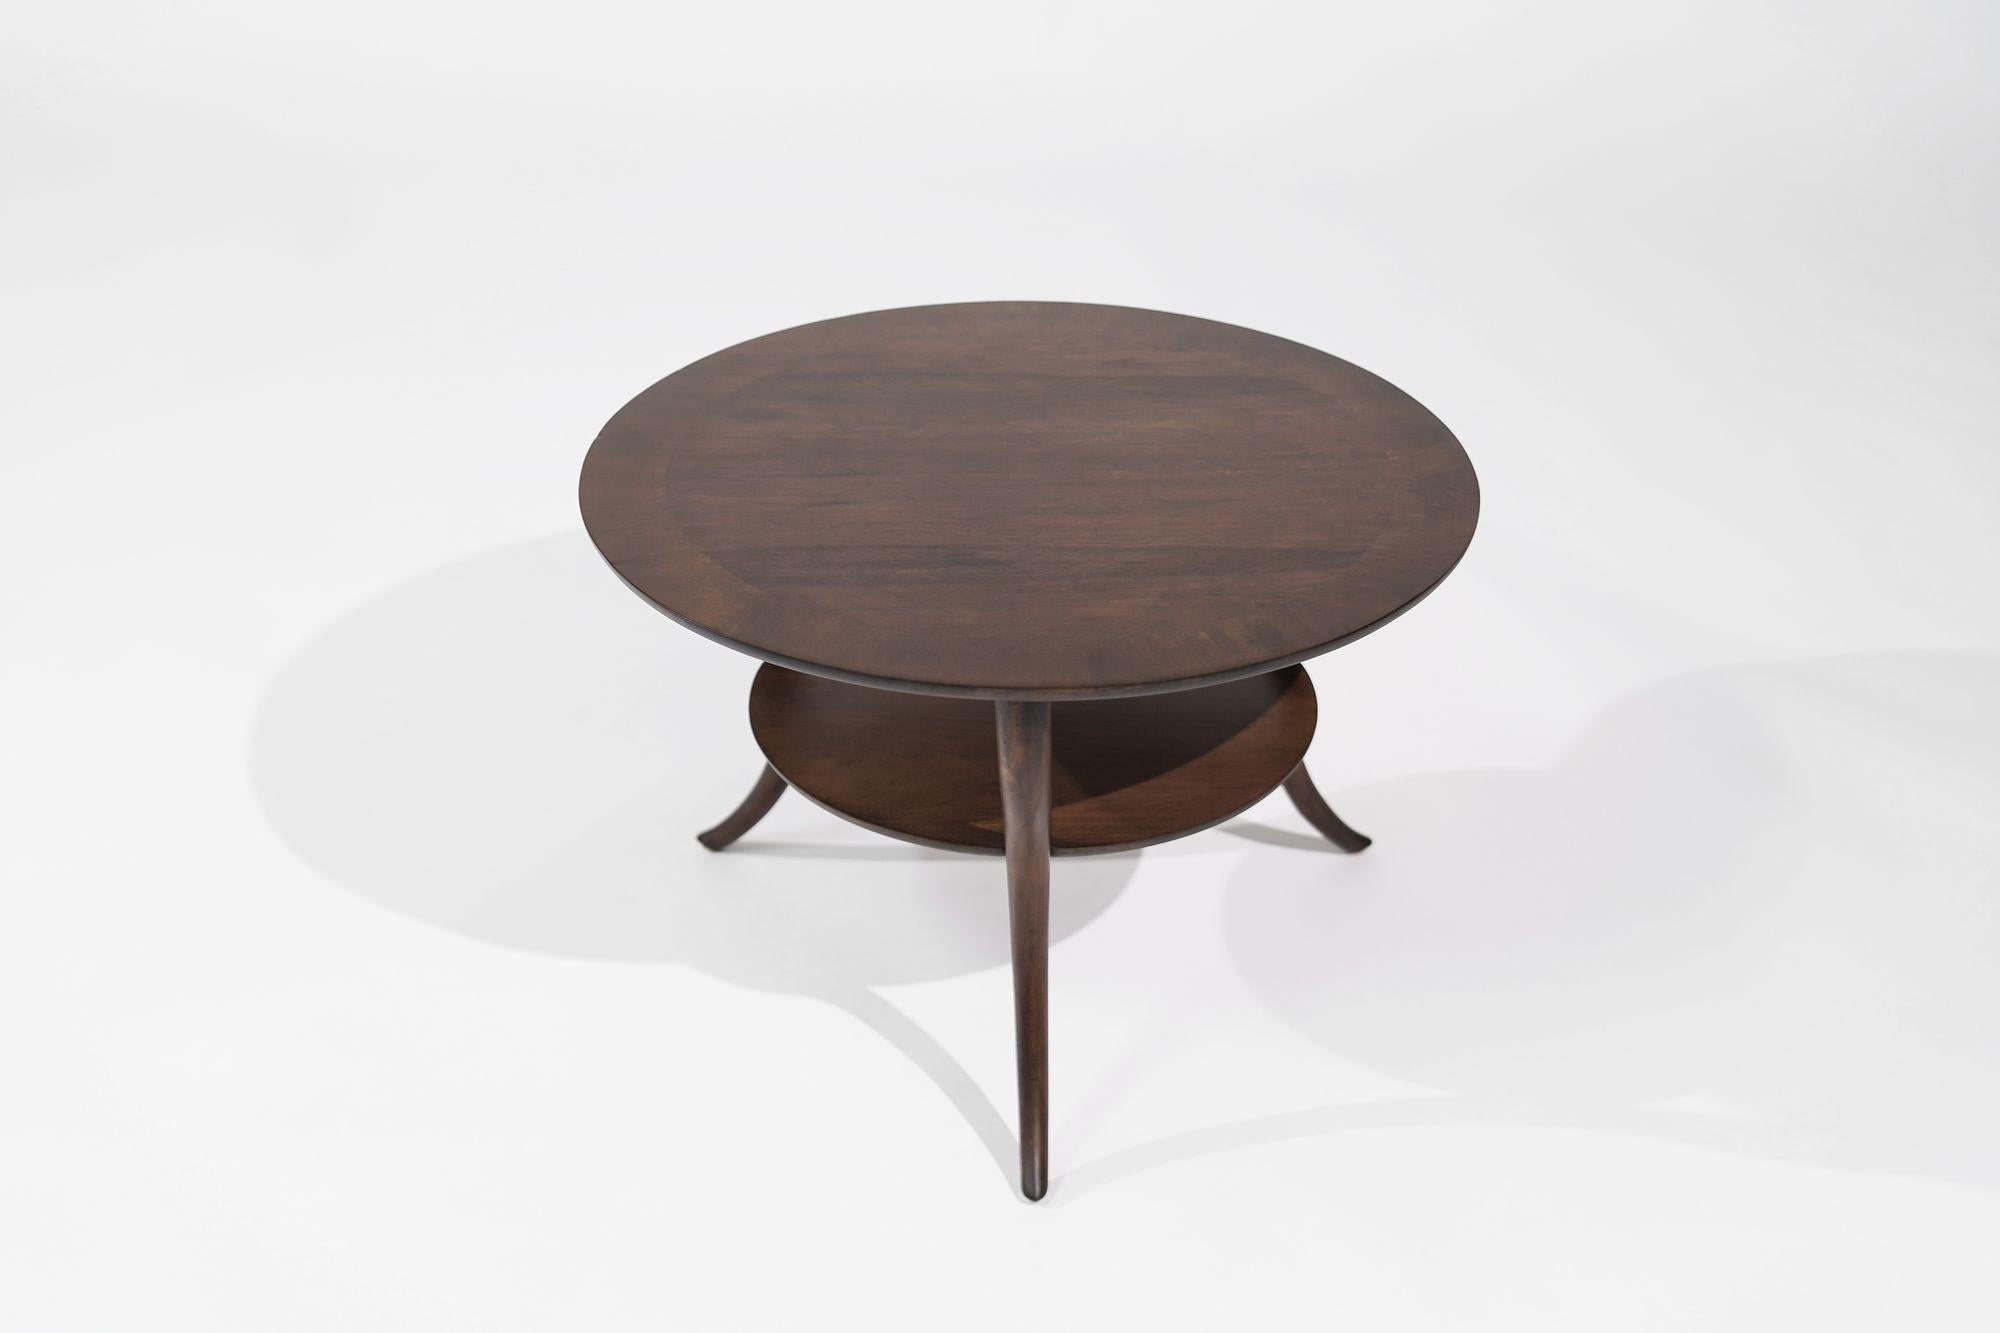 Experience the allure of mid-century design with our Vintage Sabre Leg End Table by T.H. Robsjohn-Gibbings for Widdicomb, circa 1950s. Expertly restored and refinished in a warm walnut tone, this timeless piece seamlessly combines mid-century charm